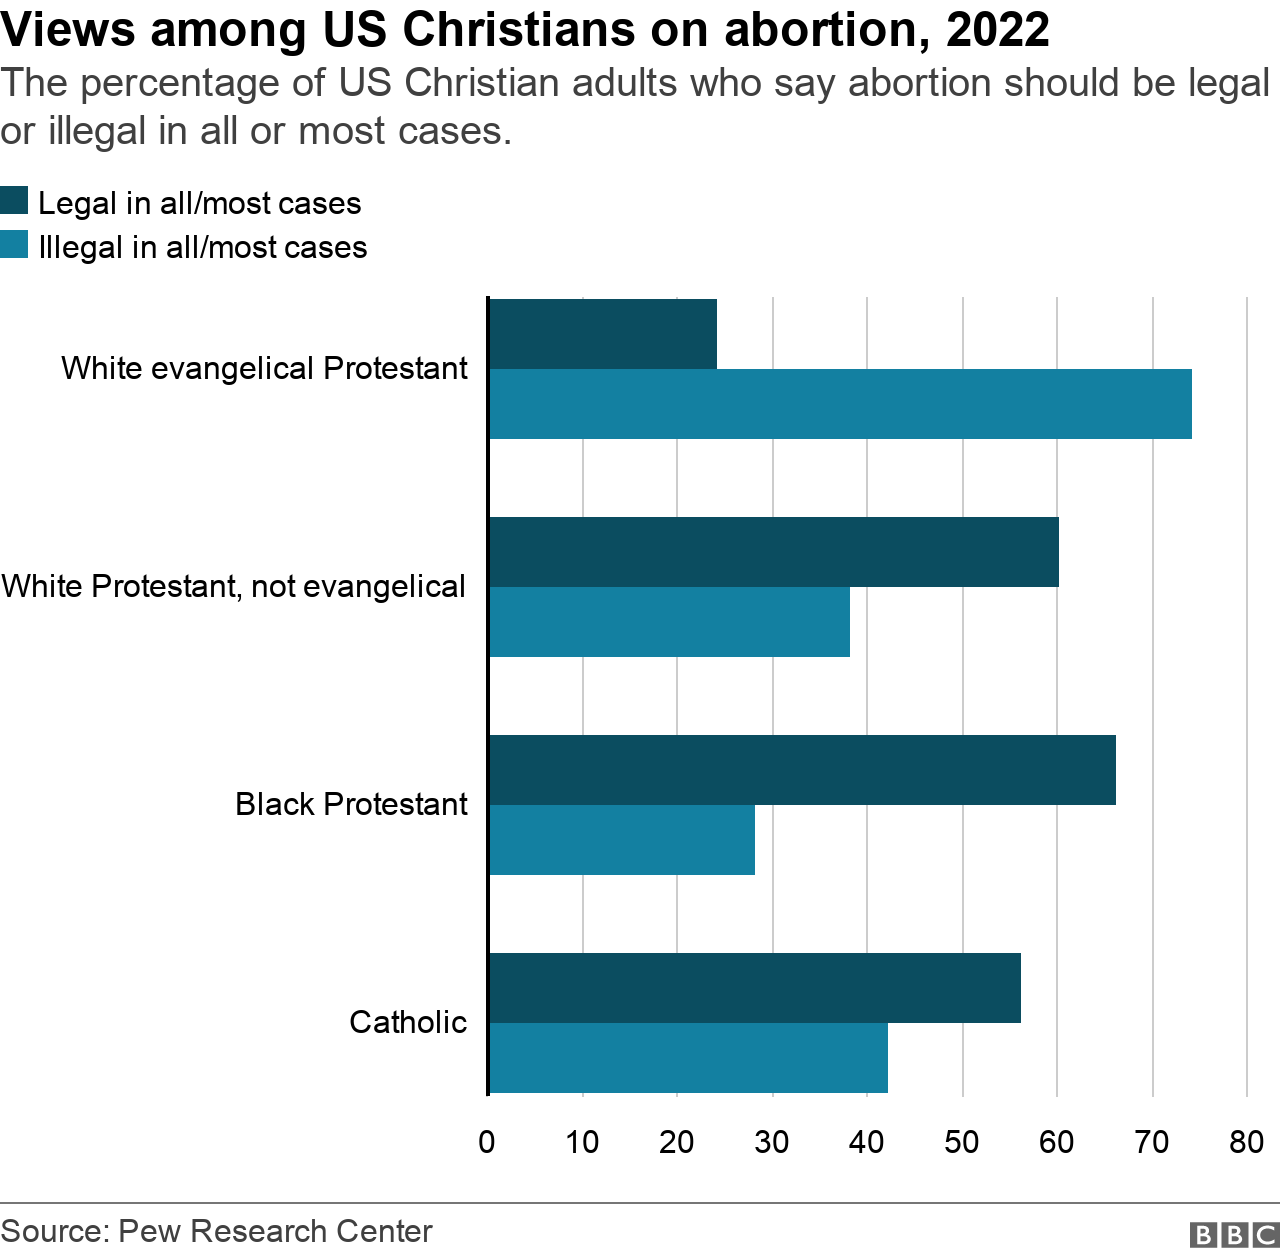 This graph shows the percentage of US Christians who say abortion should be legal or illegal in all or most cases.